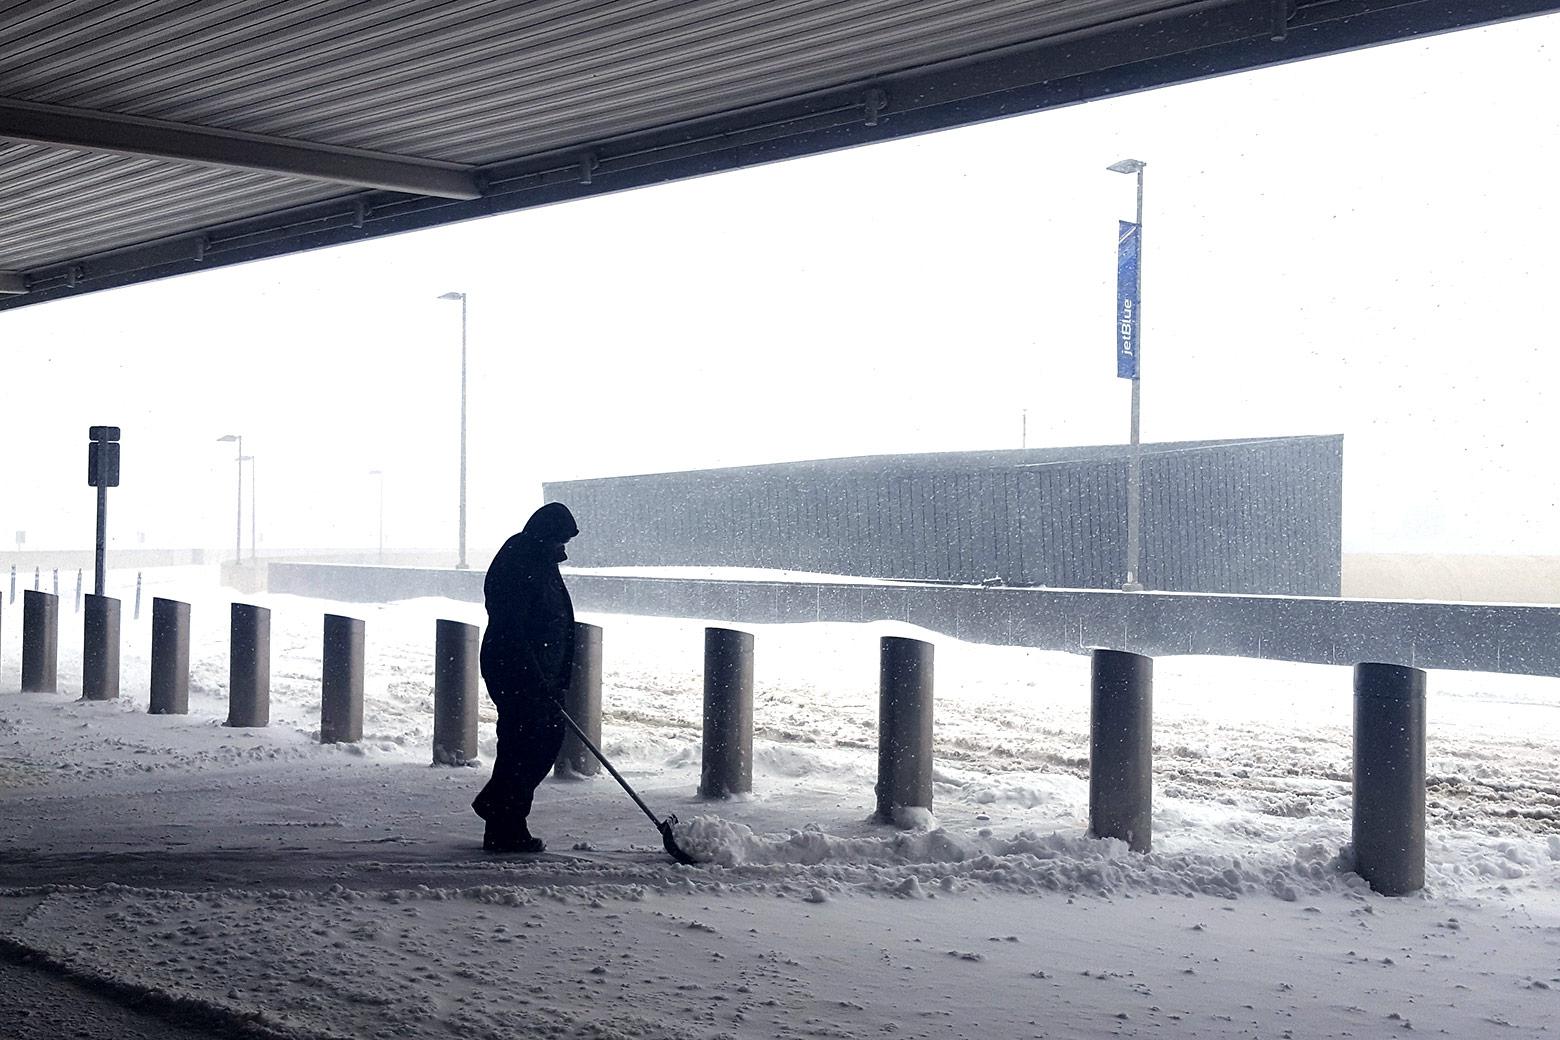 An airport employee shovels snow at the curb of the departures drop-off area.